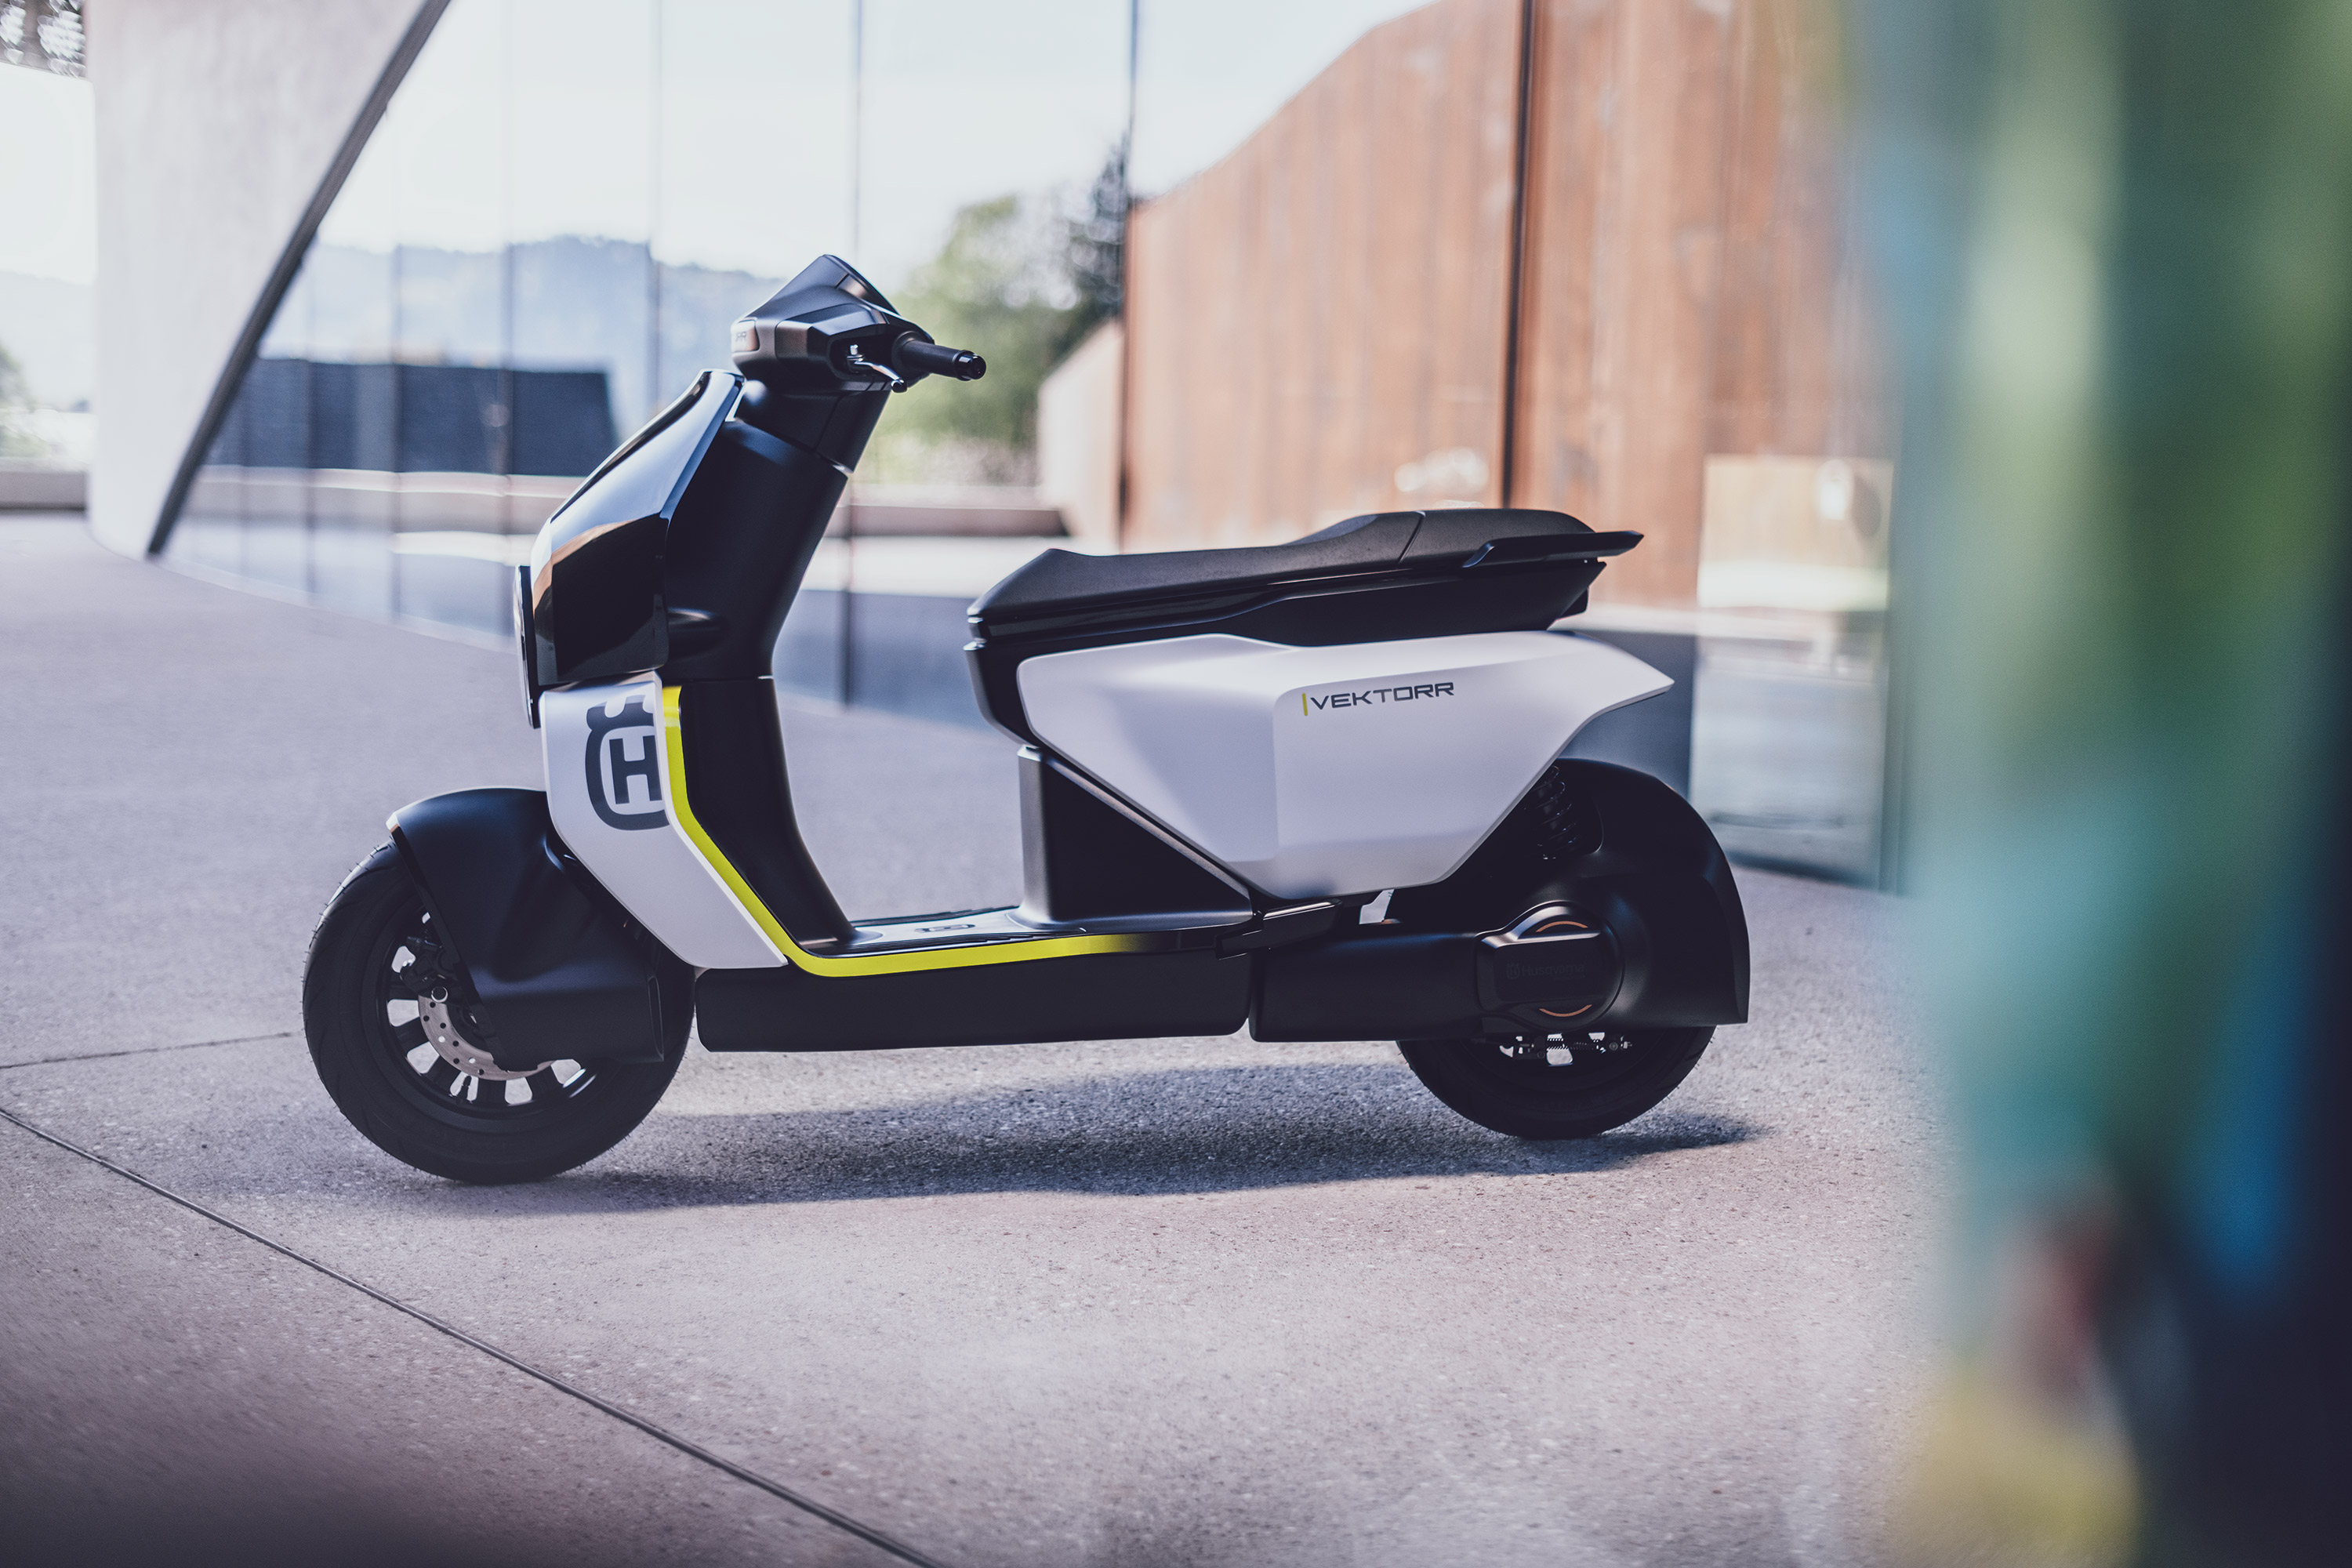 Husqvarna Motorcycles to offer electric as part of range of zero emission two-wheelers for urban riders